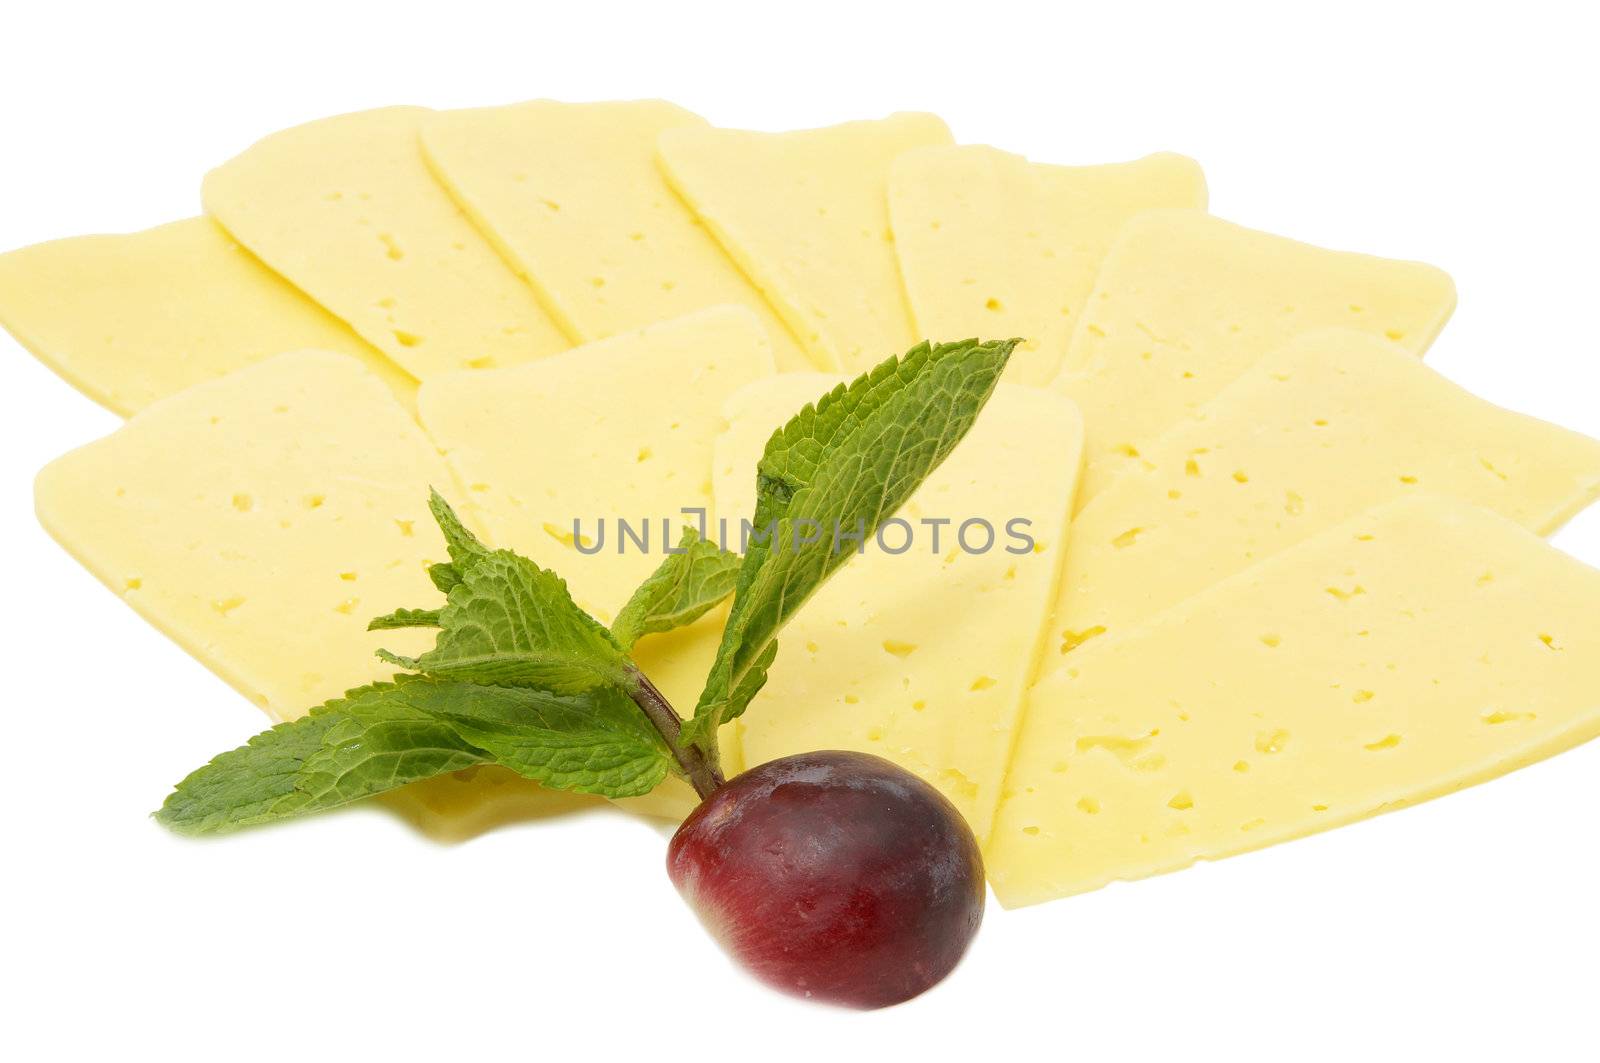 cheese on a white background by Lester120